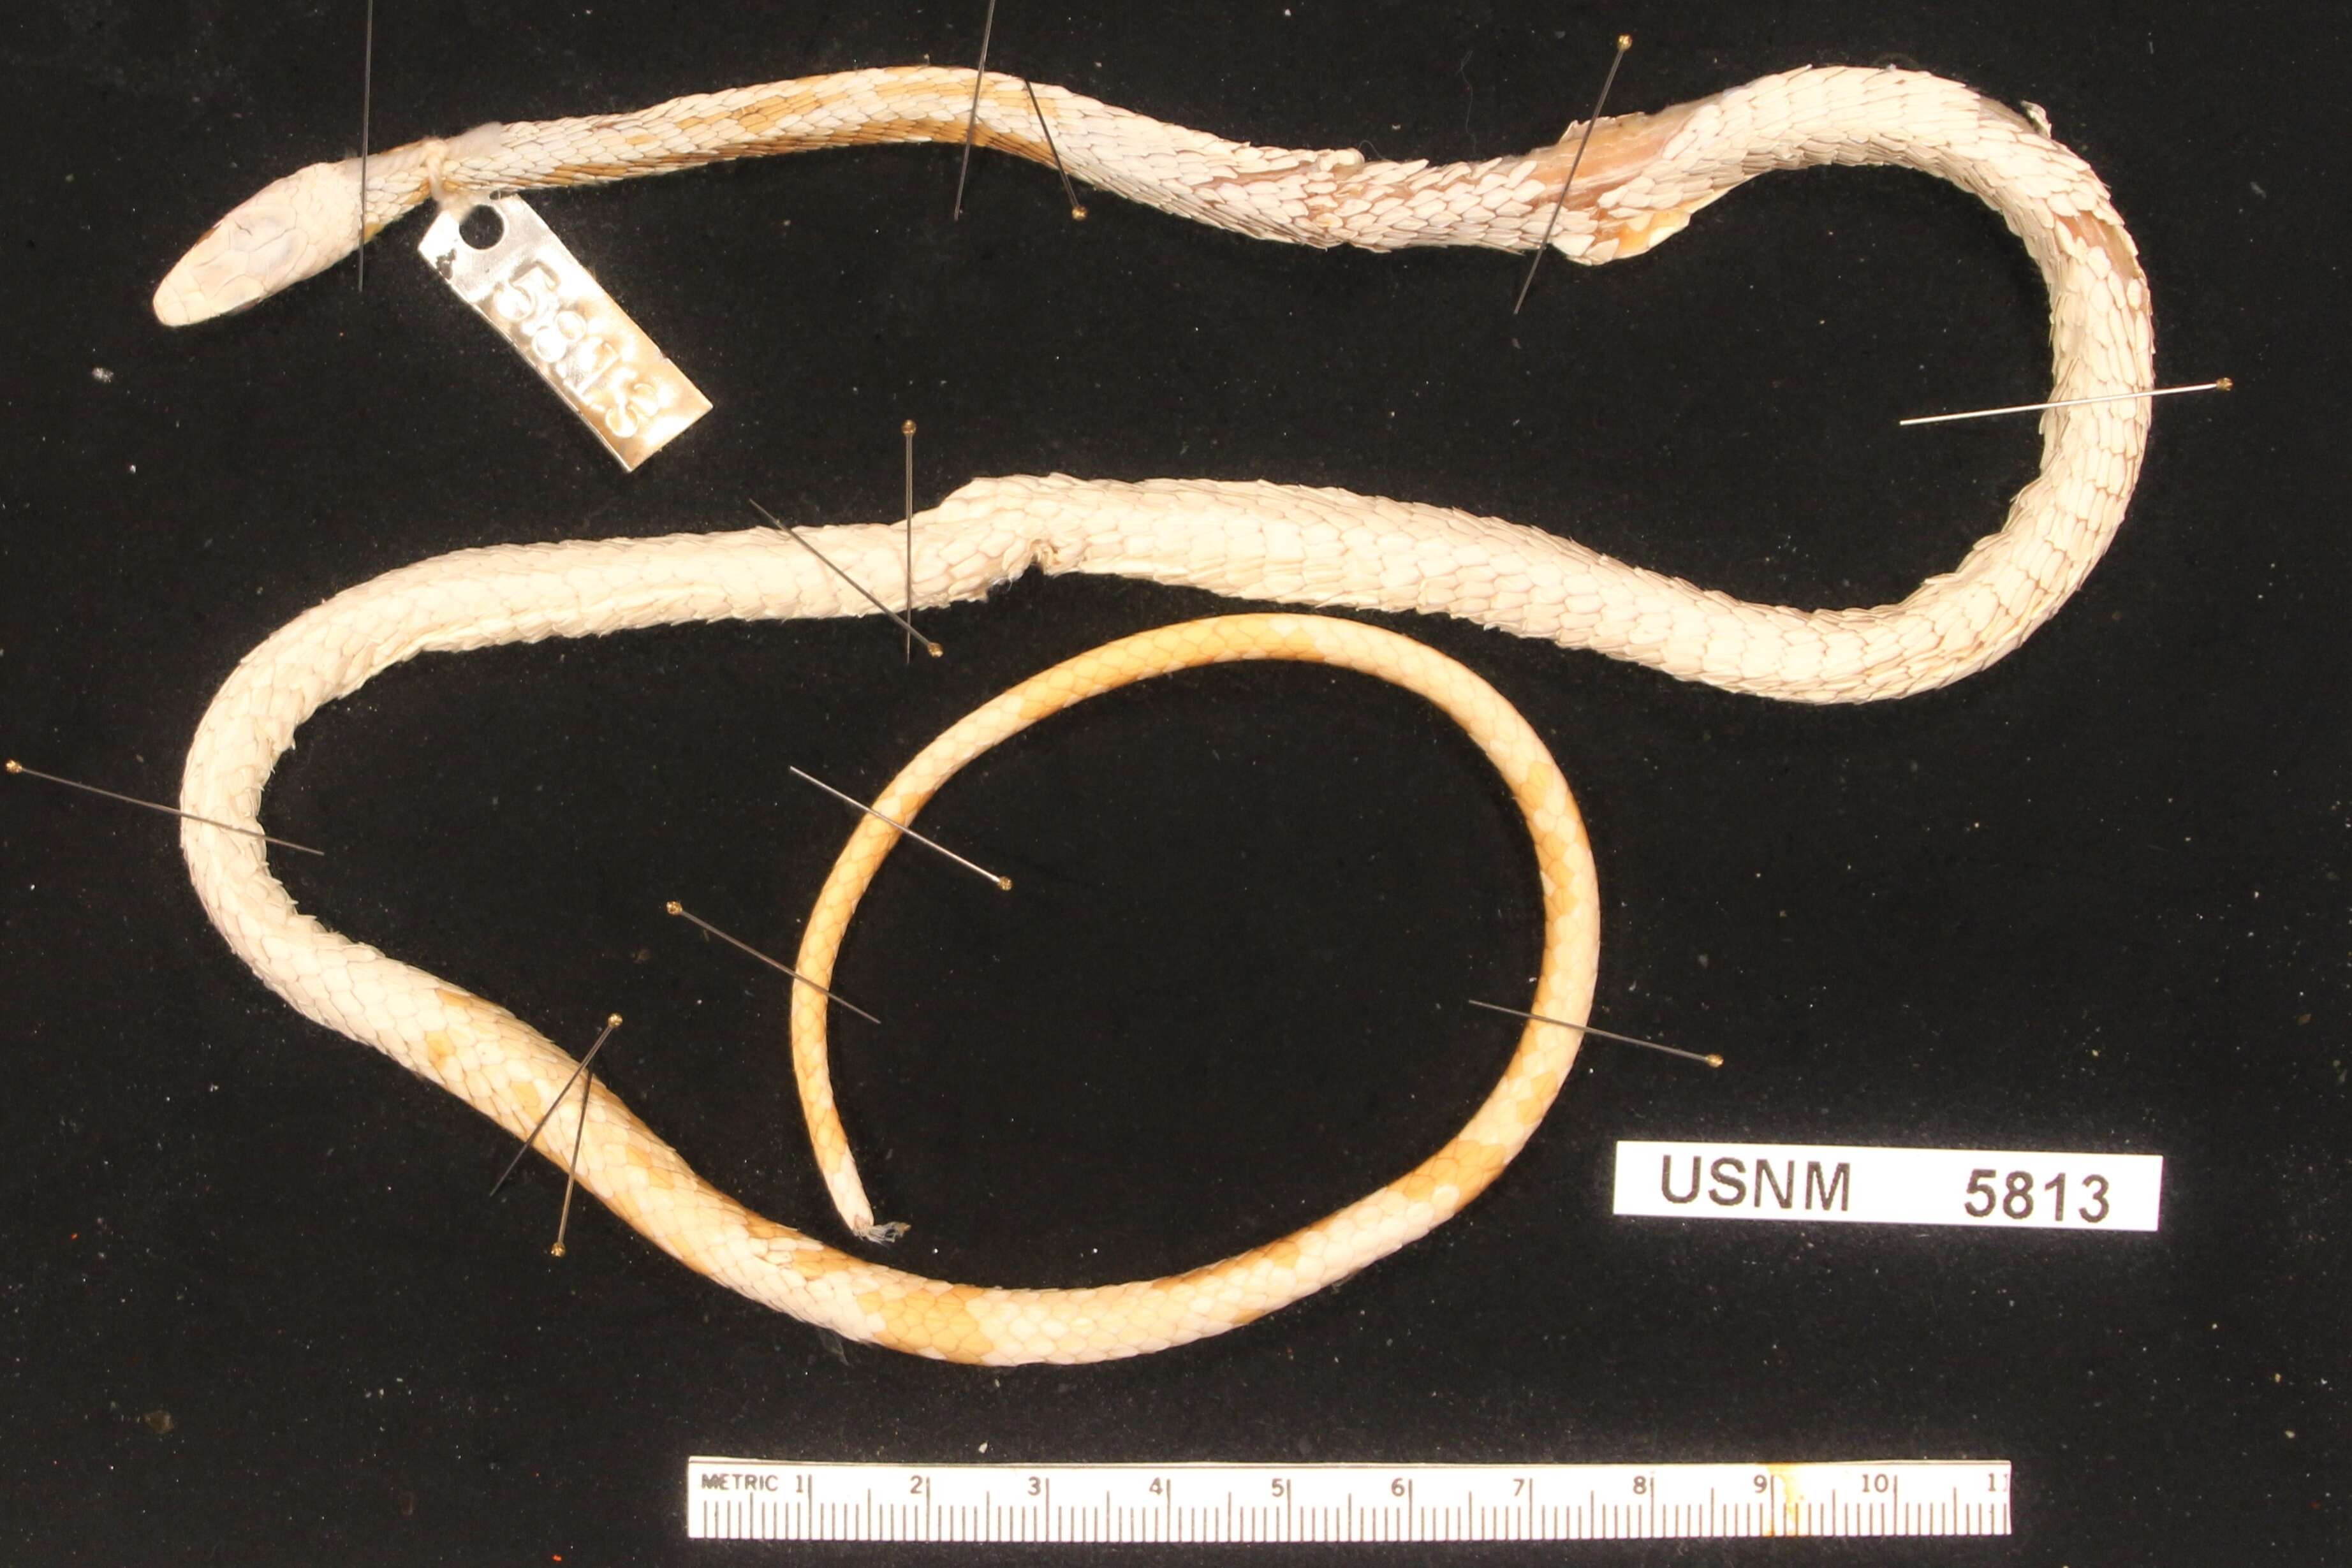 Image of Wagler's Puffing Snake